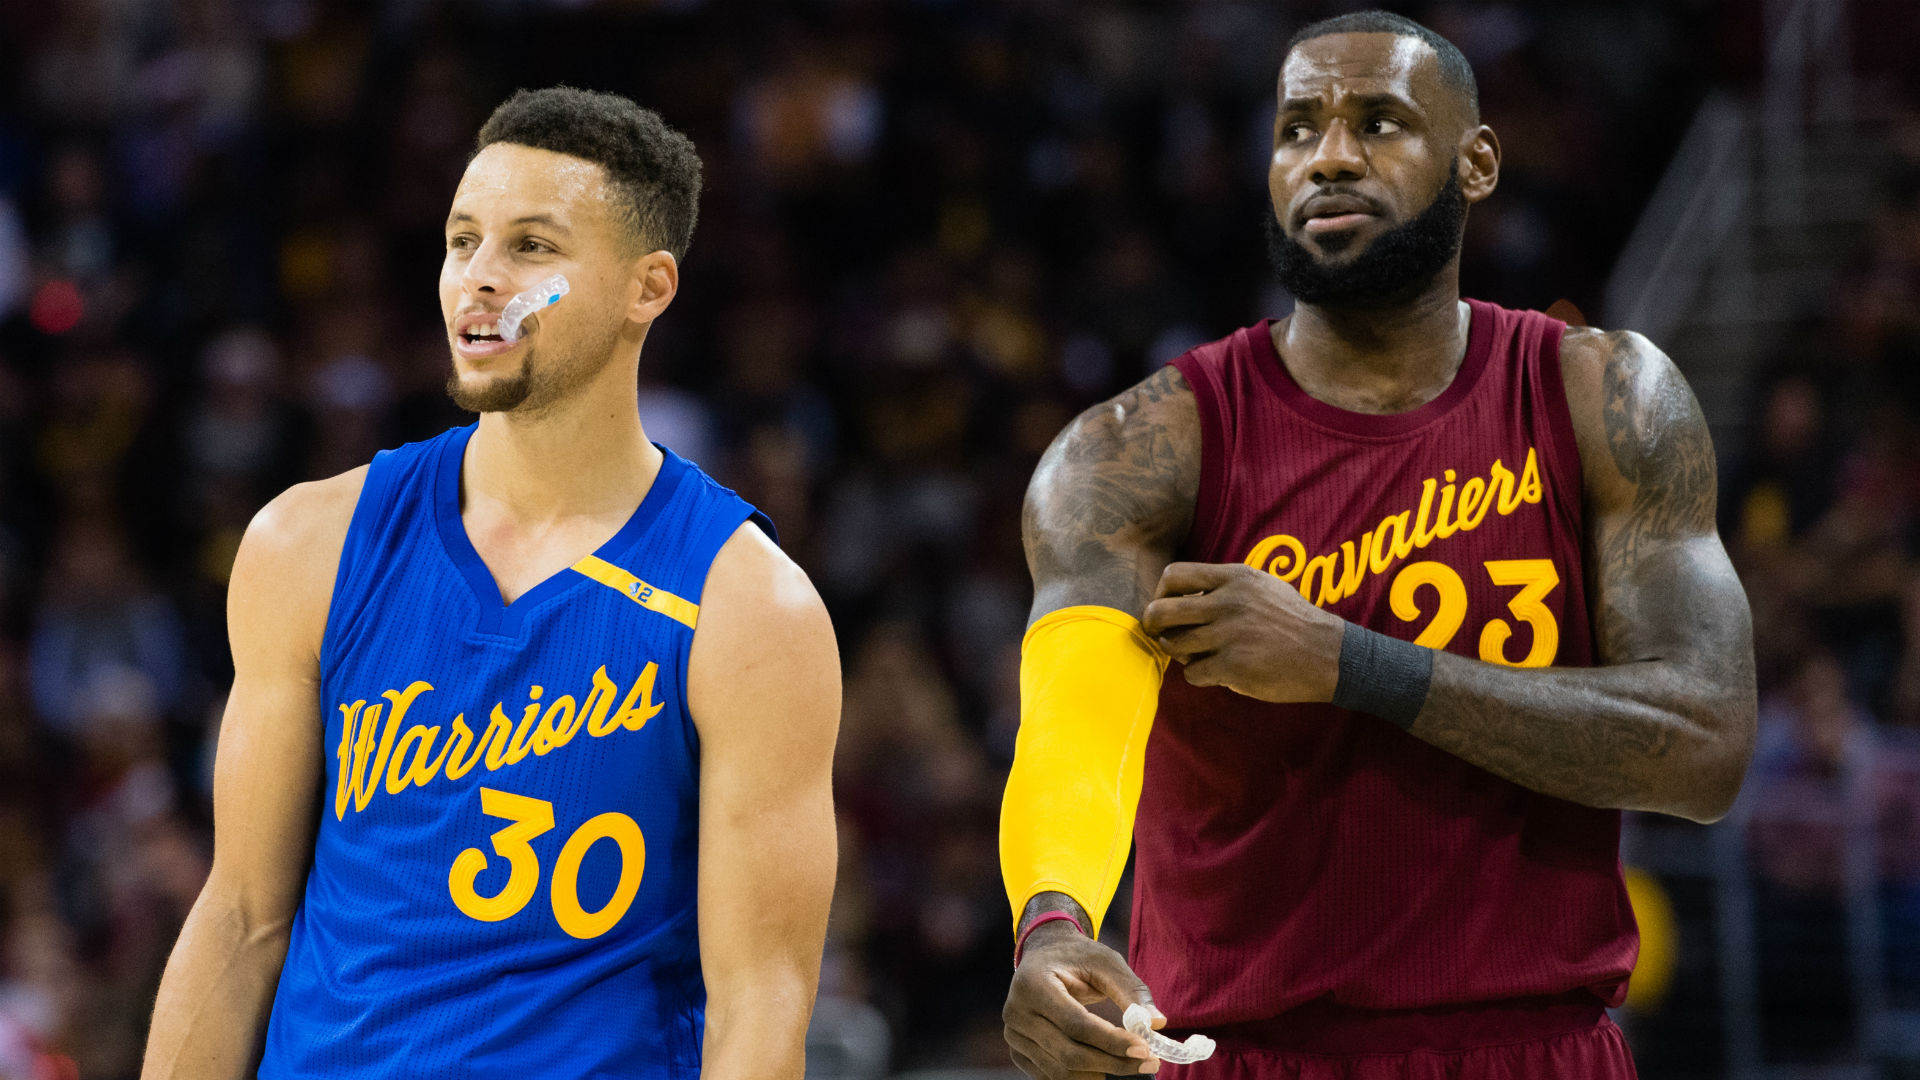 Everyone had to step over Stephen Curry dummy to enter LeBron James' party